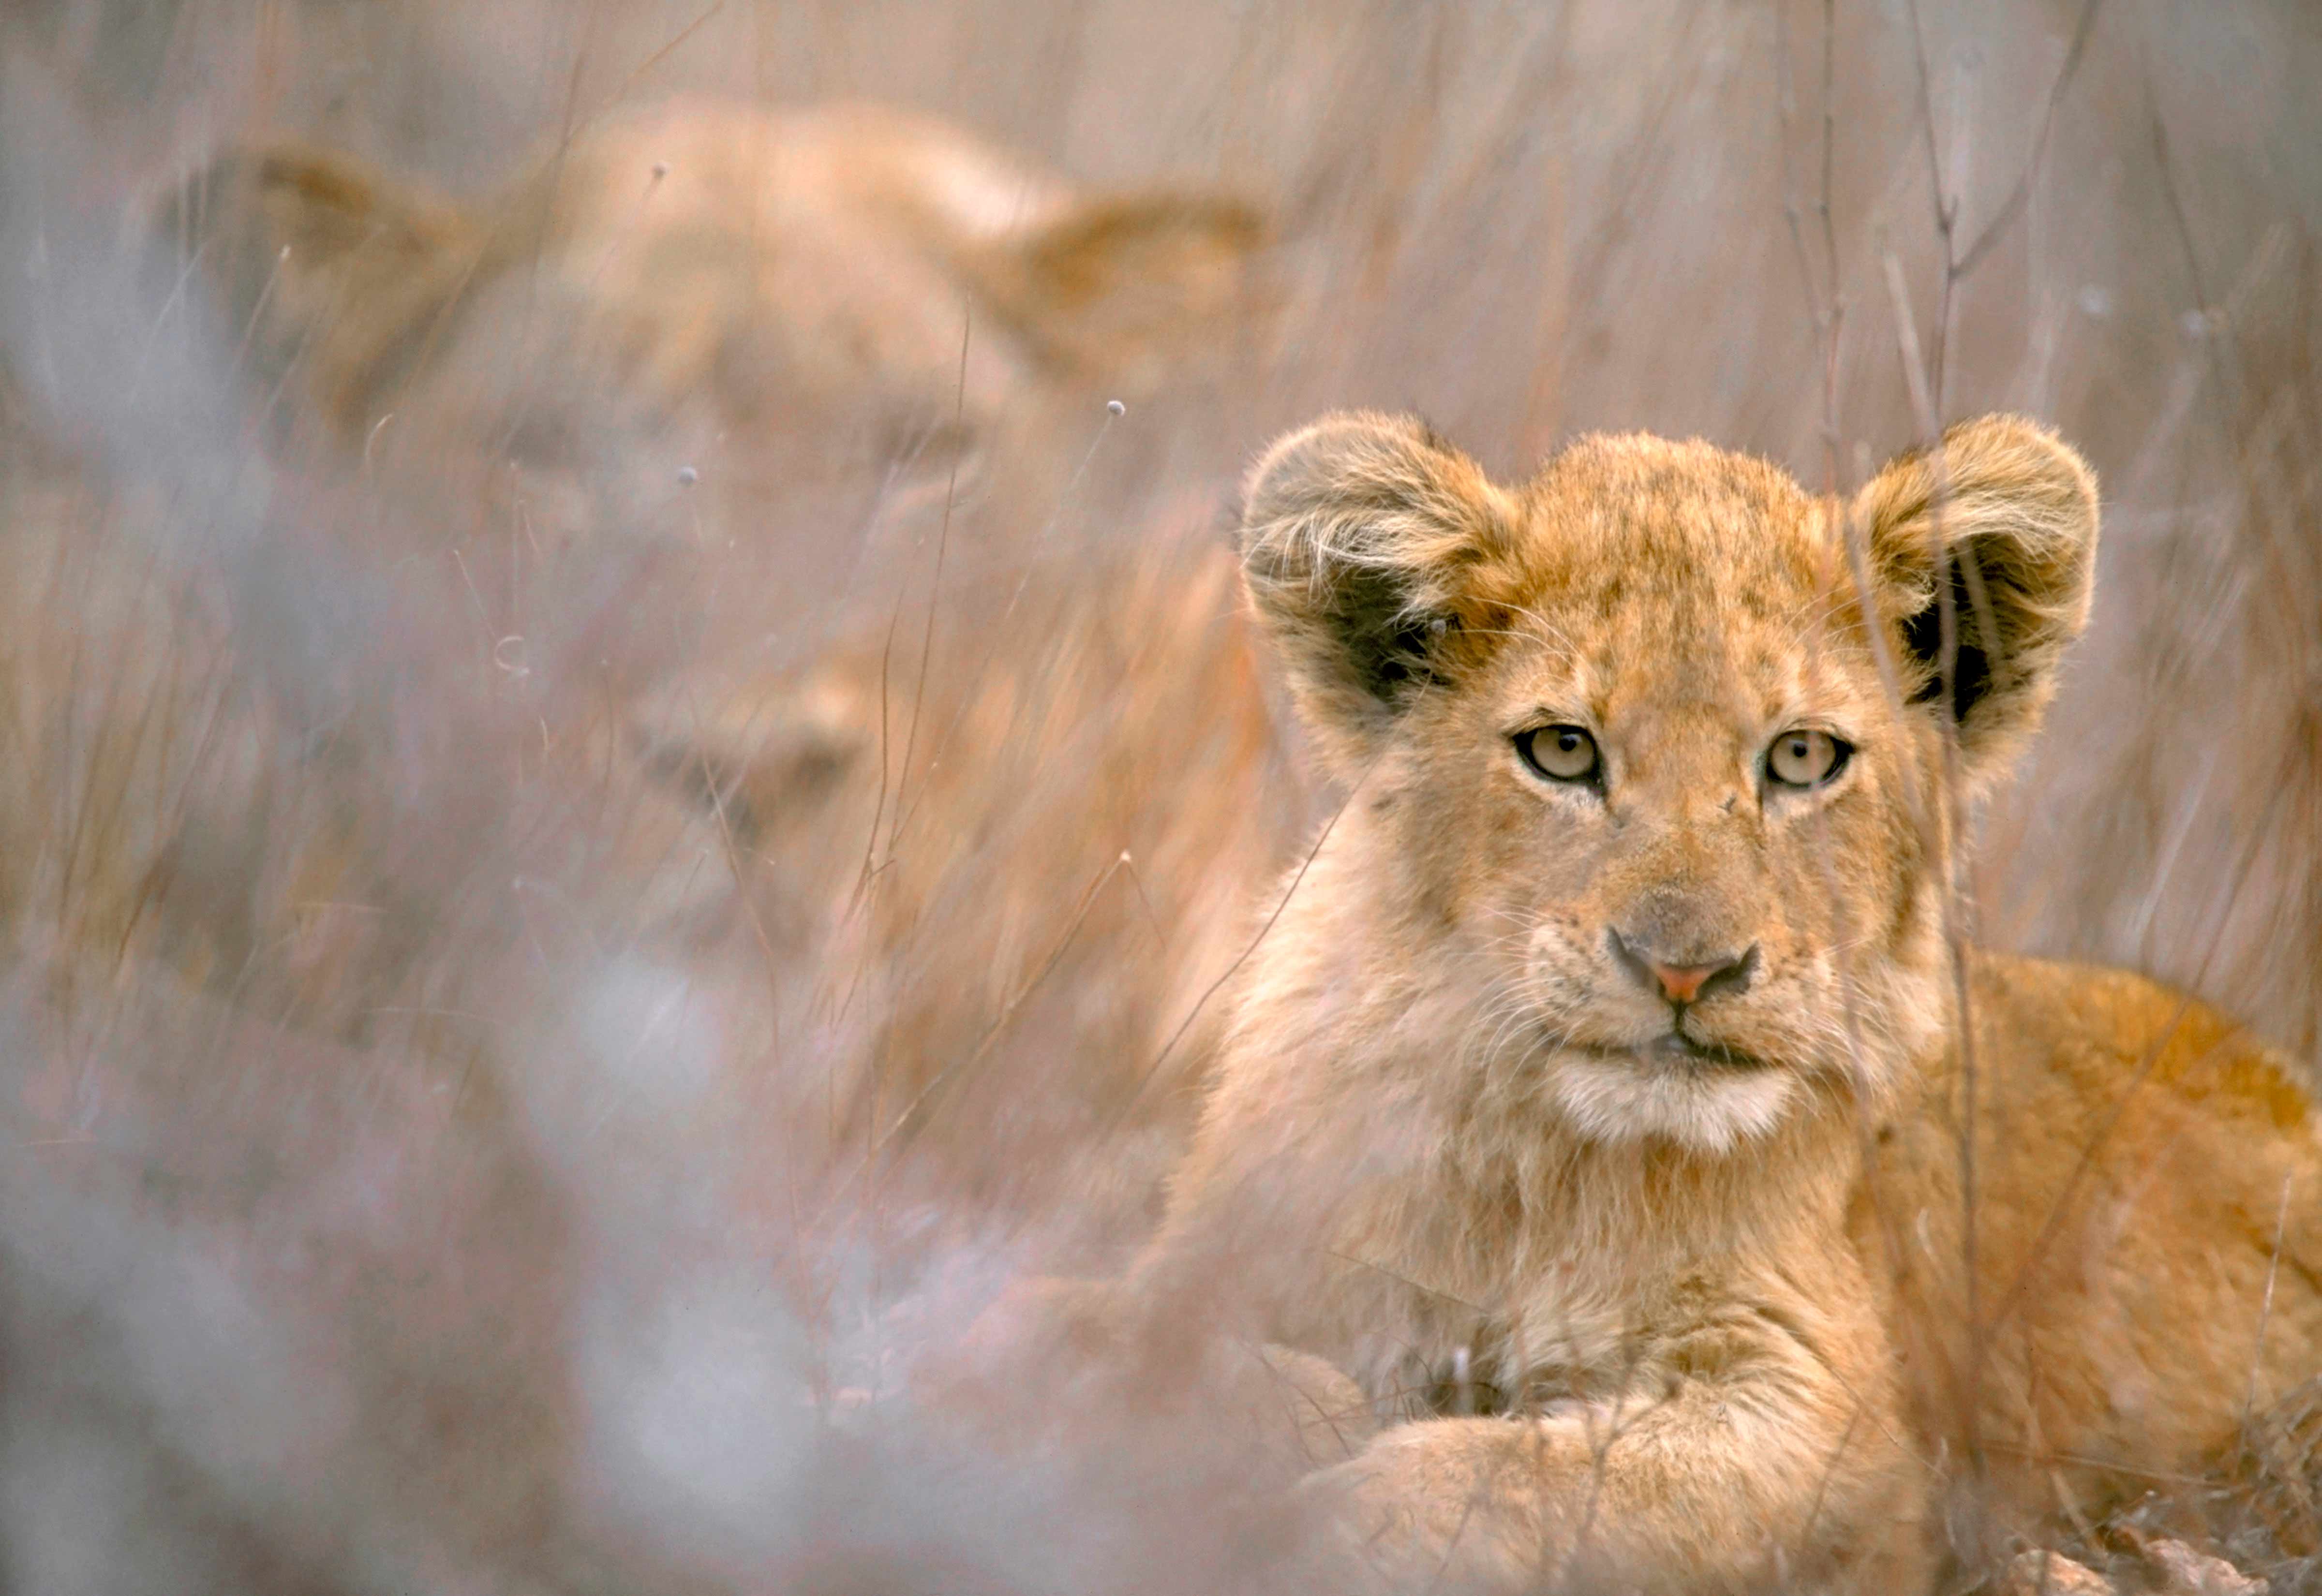 Cool Background of animals that will blow you away. Lions